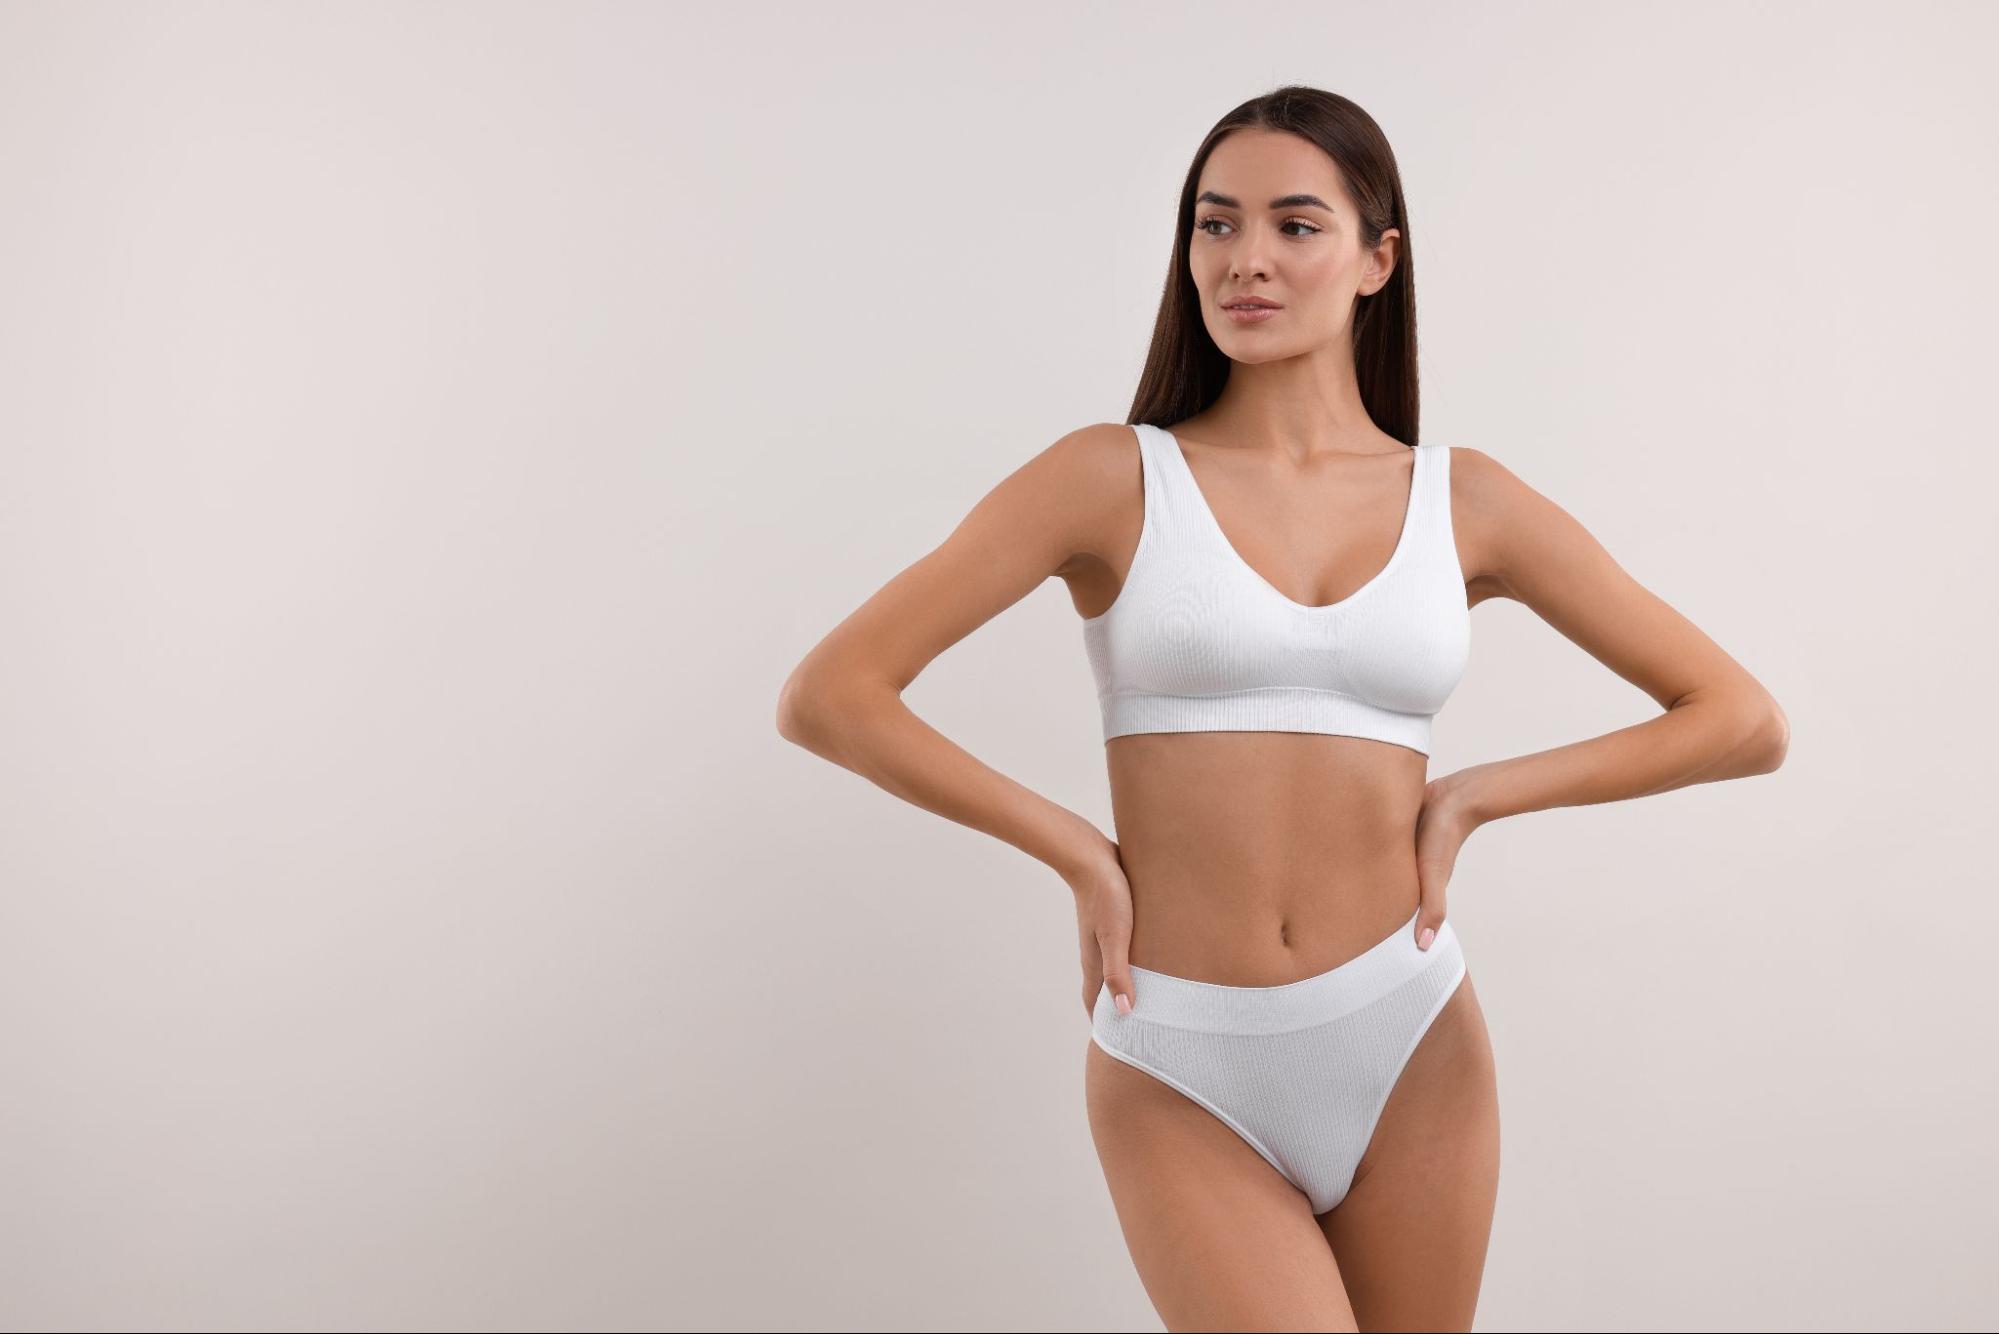 What Areas Can Be Treated With Liposuction?